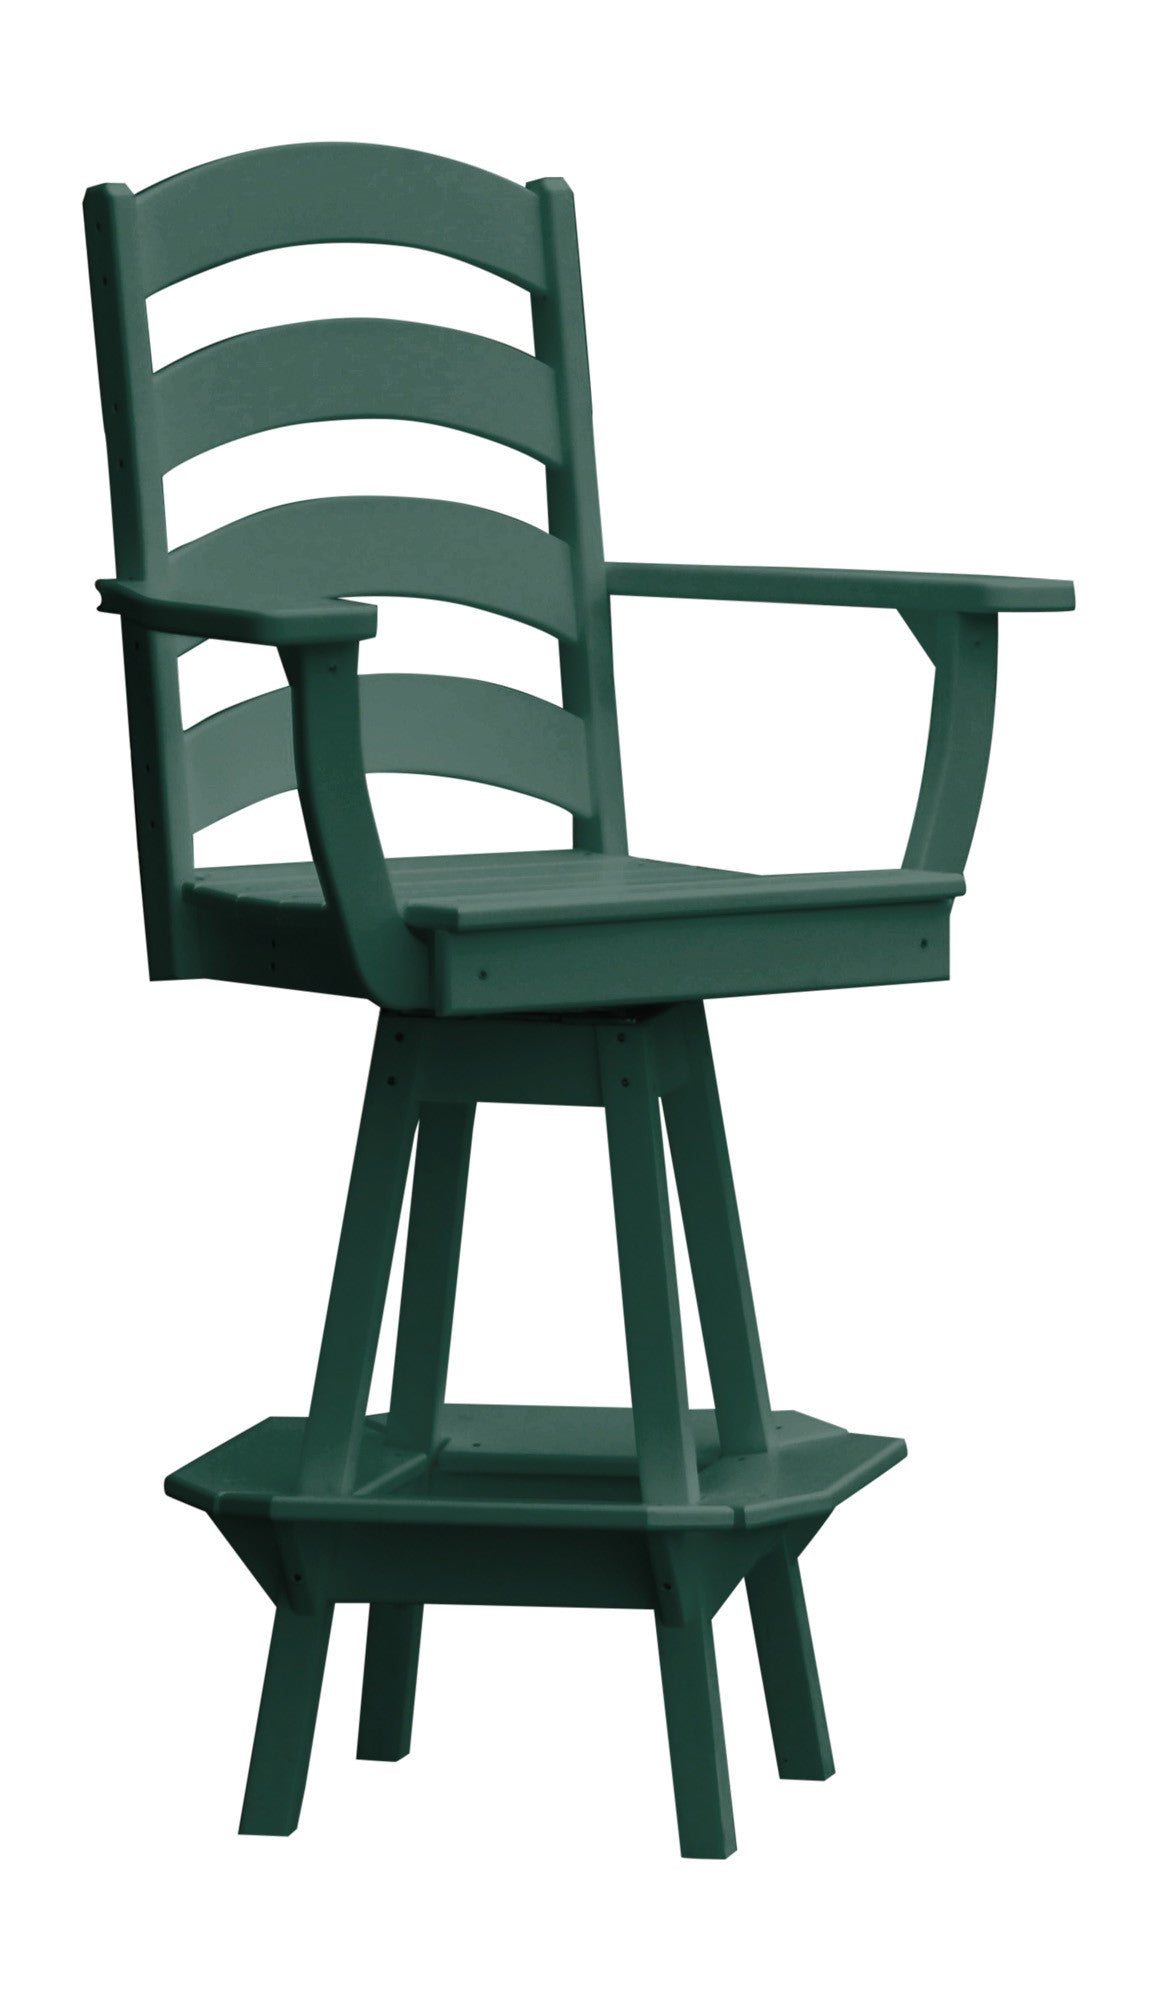 A&L Furniture Recycled Plastic Ladderback Swivel Bar Chair with Arms - Turf Green